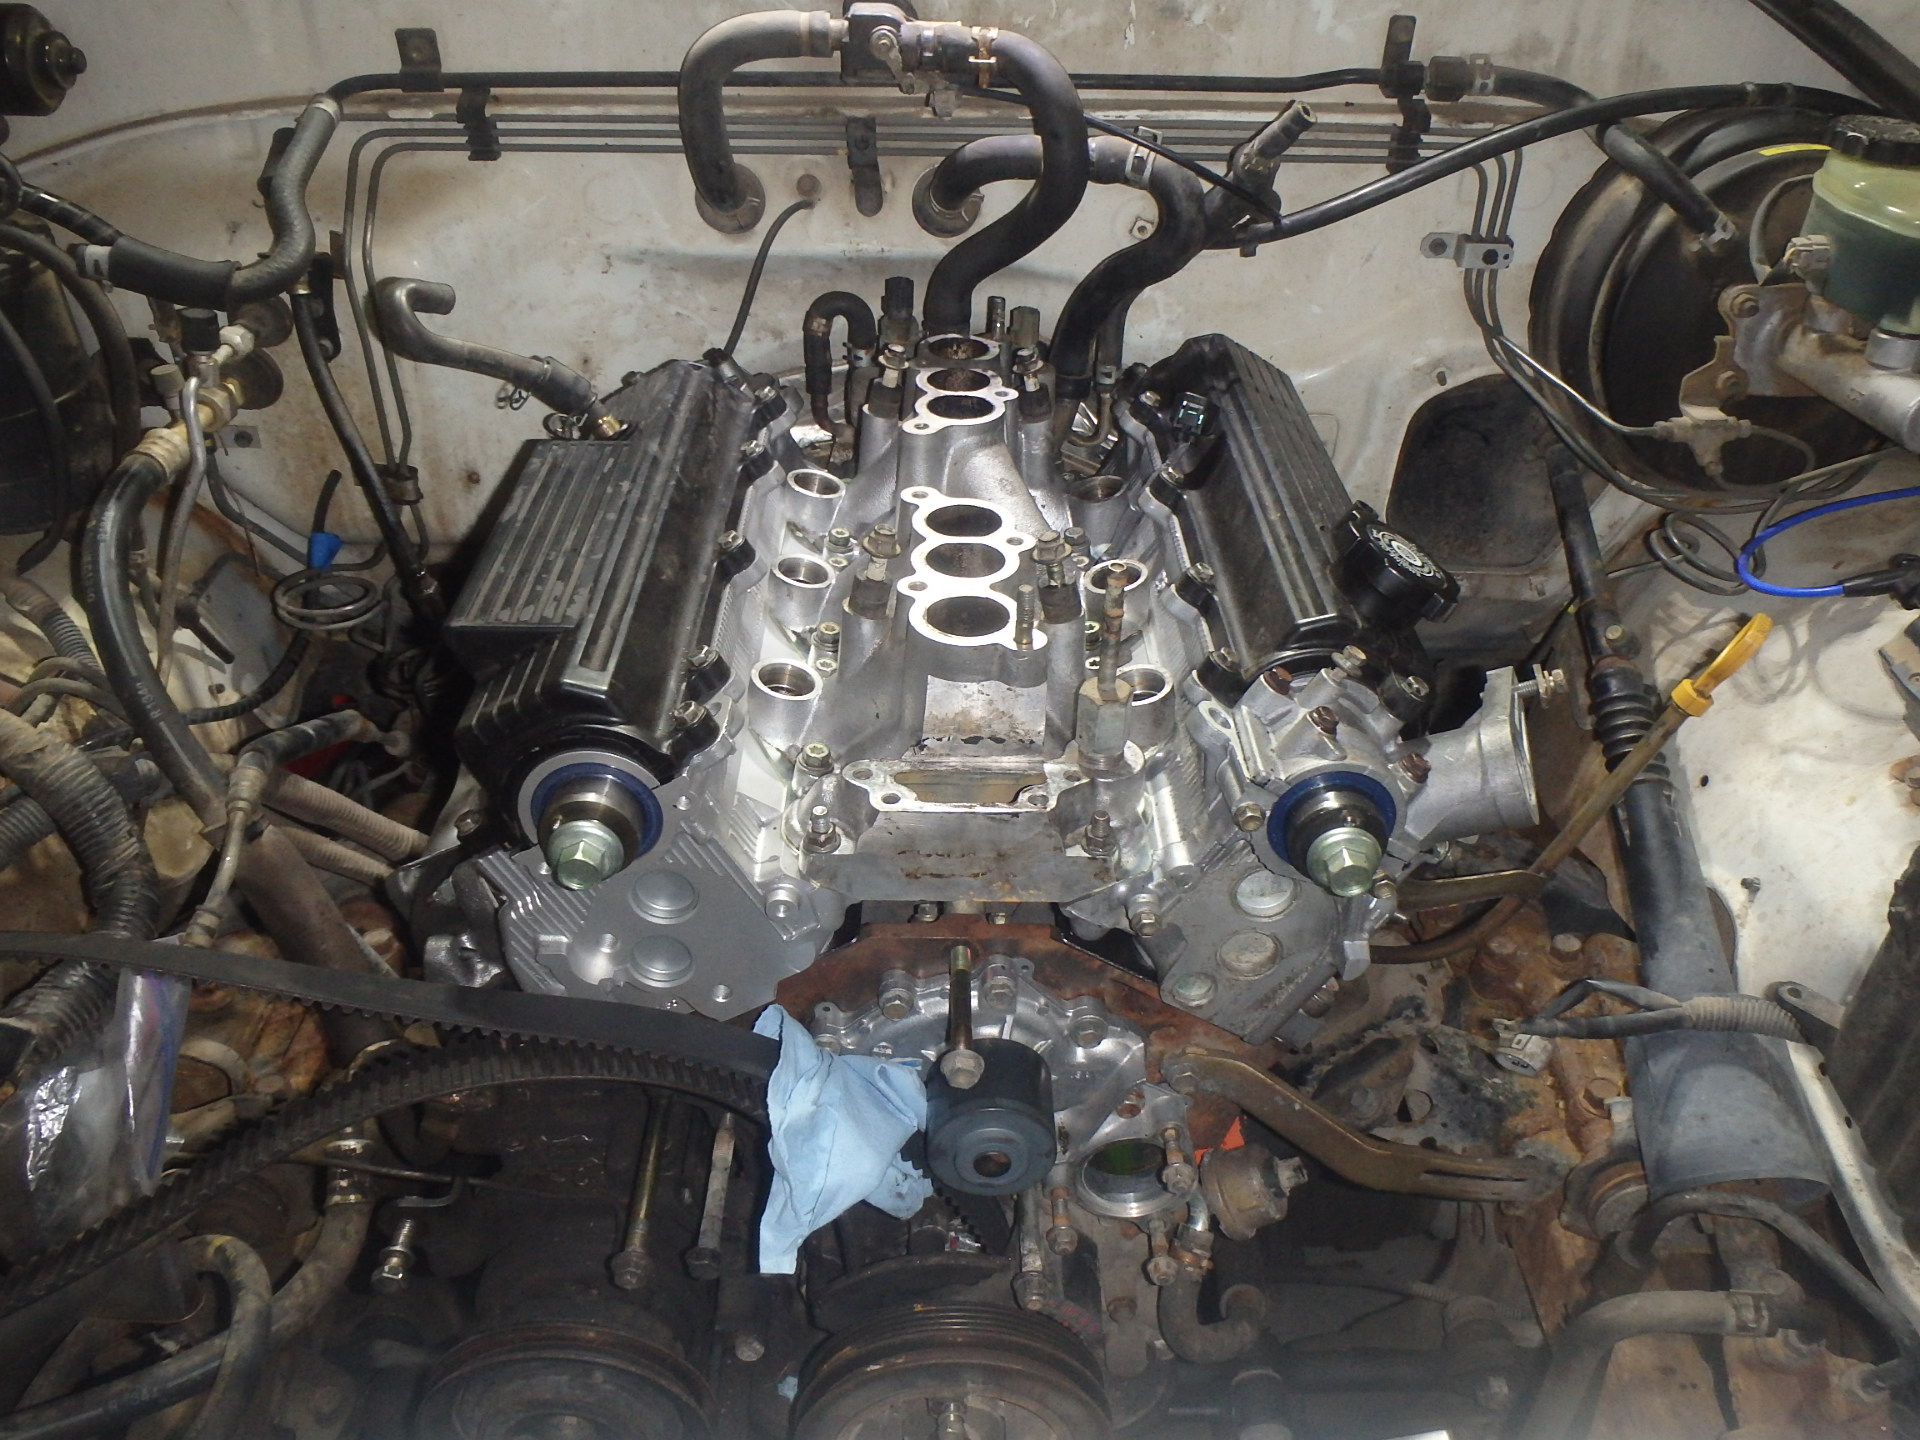 Manifolds and valve covers installed